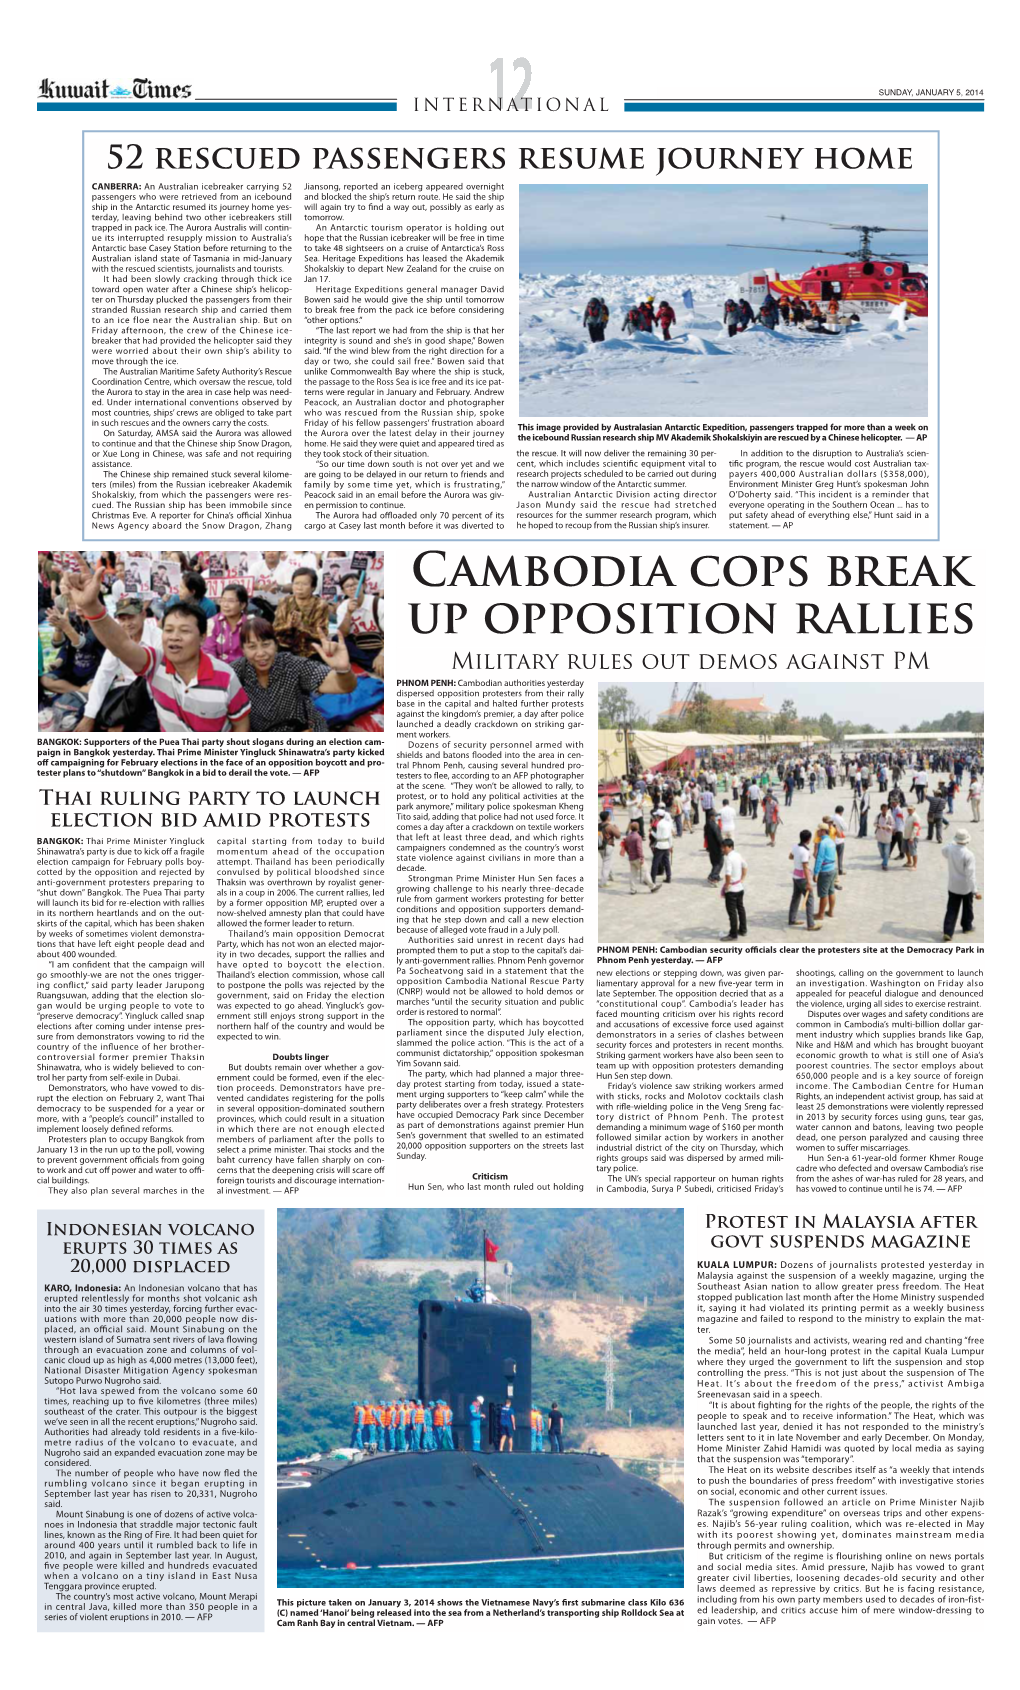 Cambodia Cops Break up Opposition Rallies Military Rules out Demos Against PM